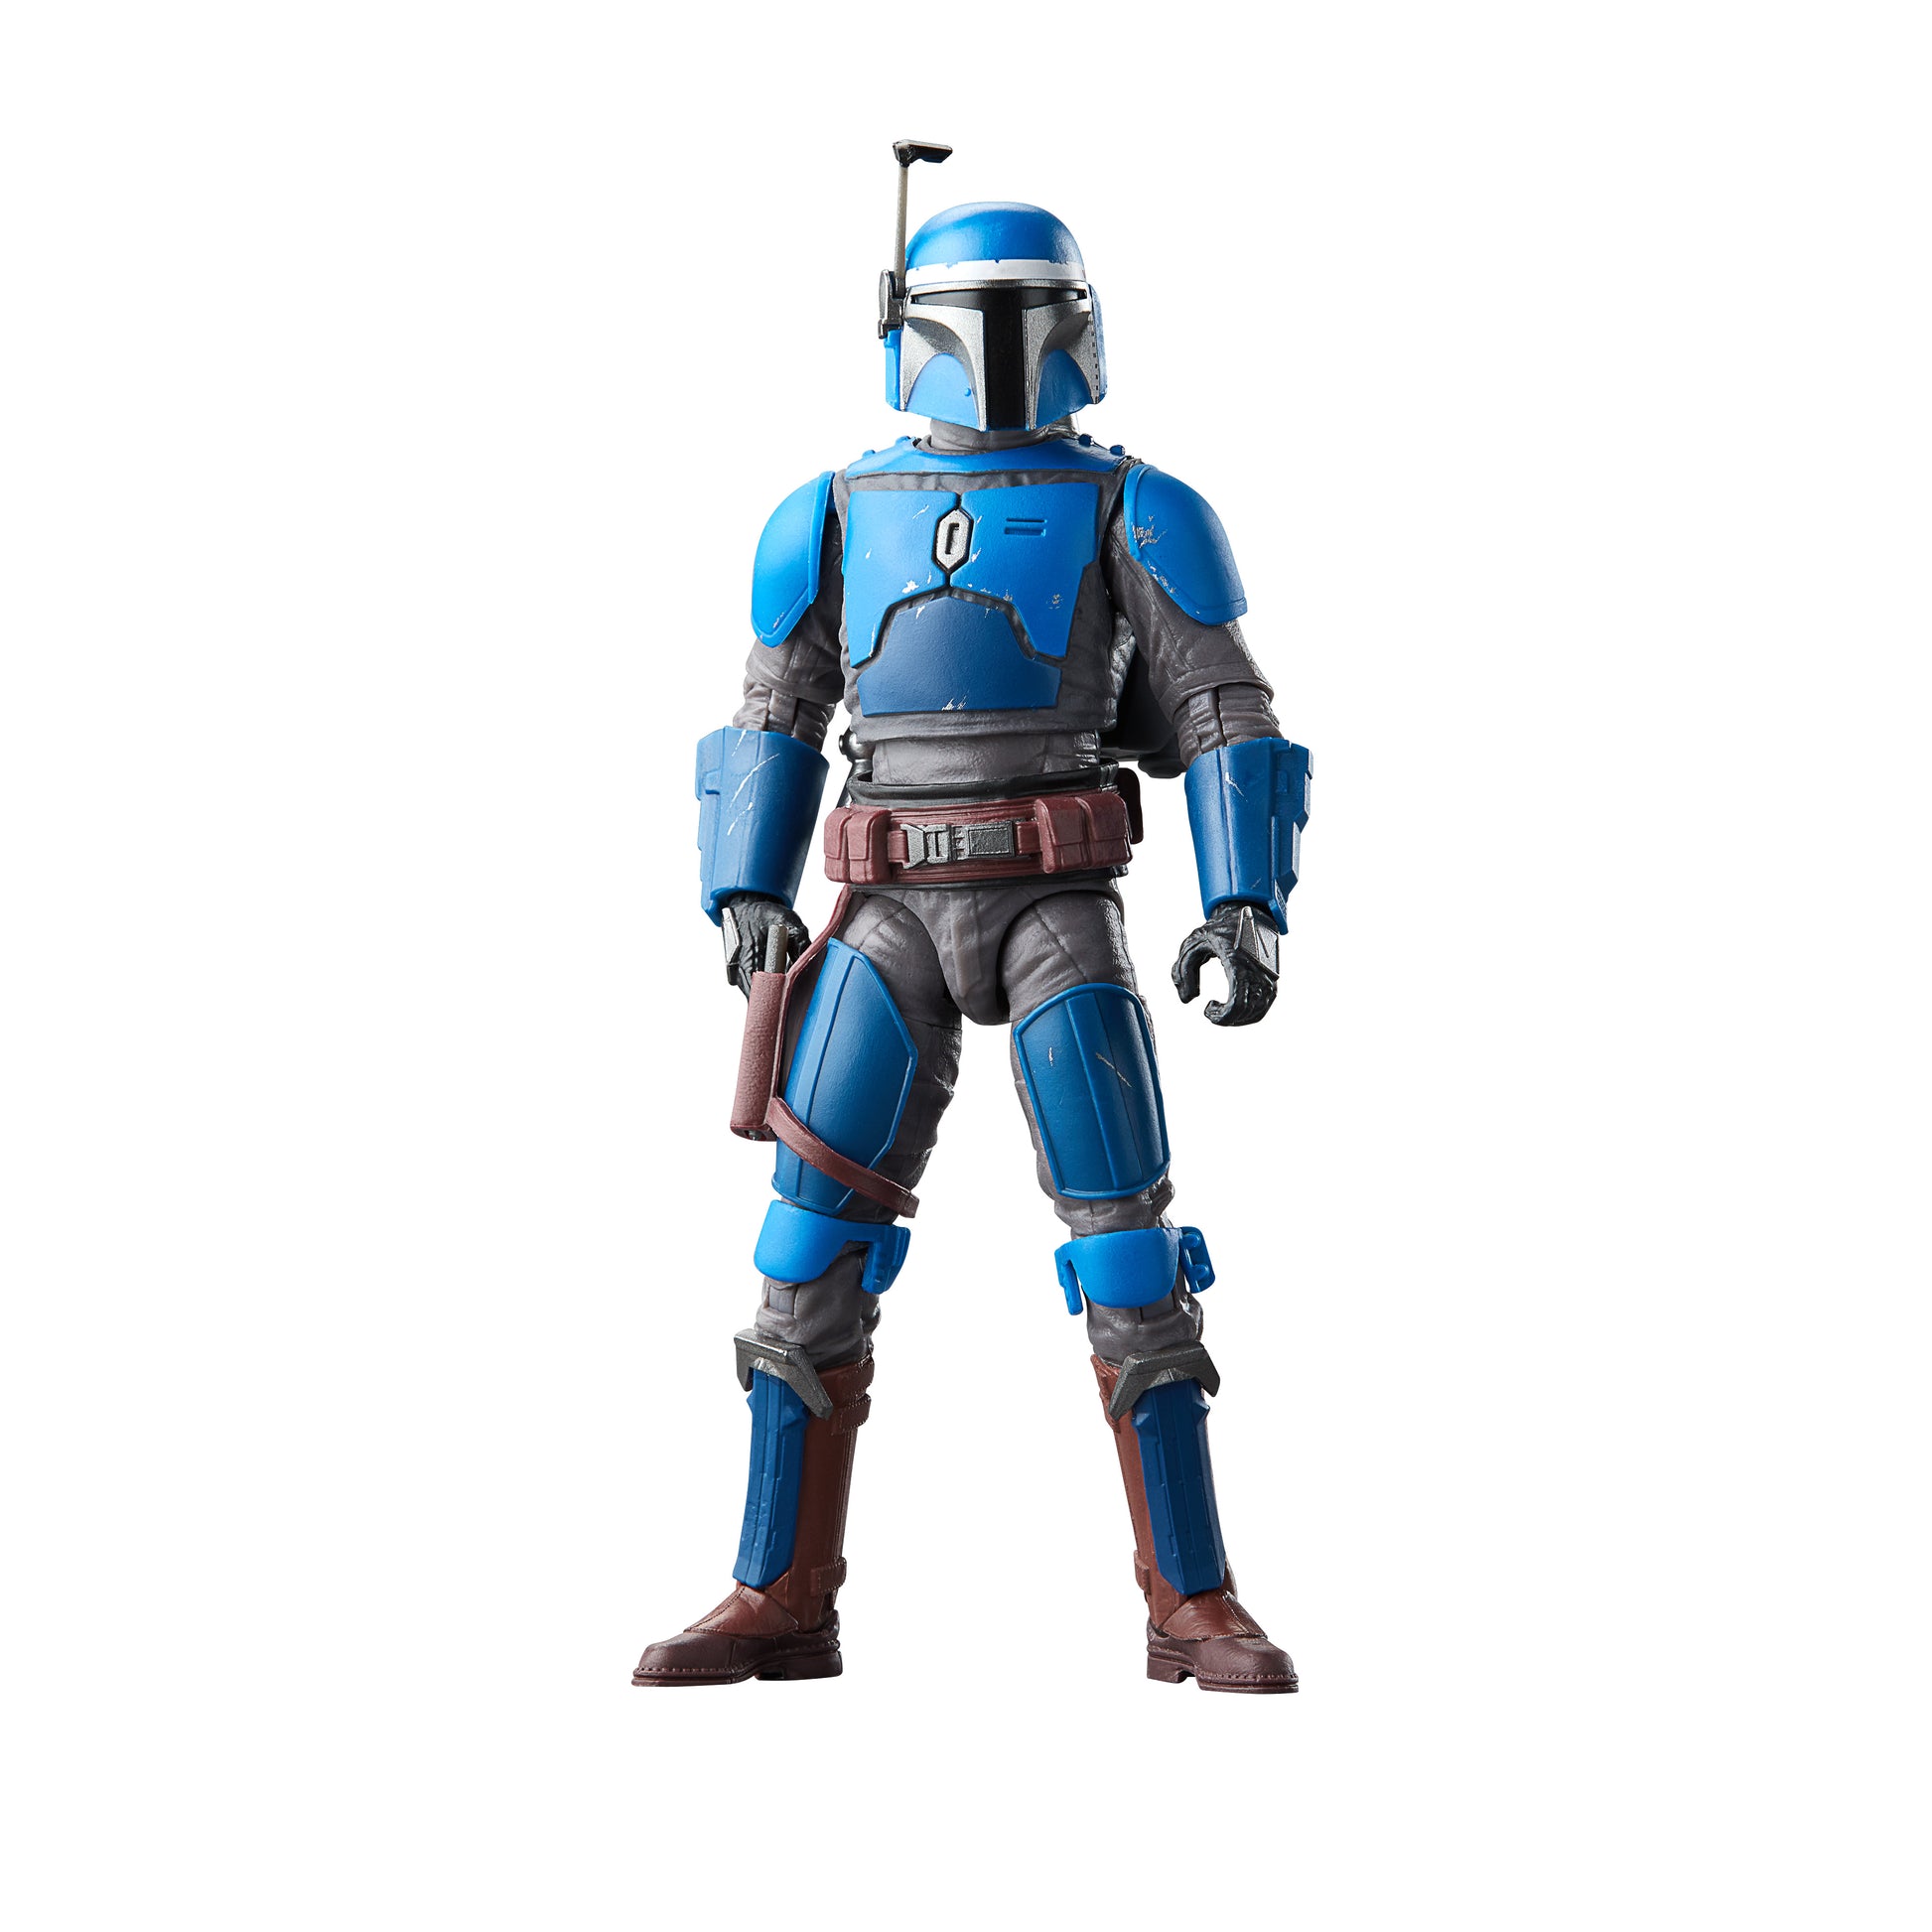 Star Wars The Black Series Mandalorian Privateer Collectible Action Figure (6”)